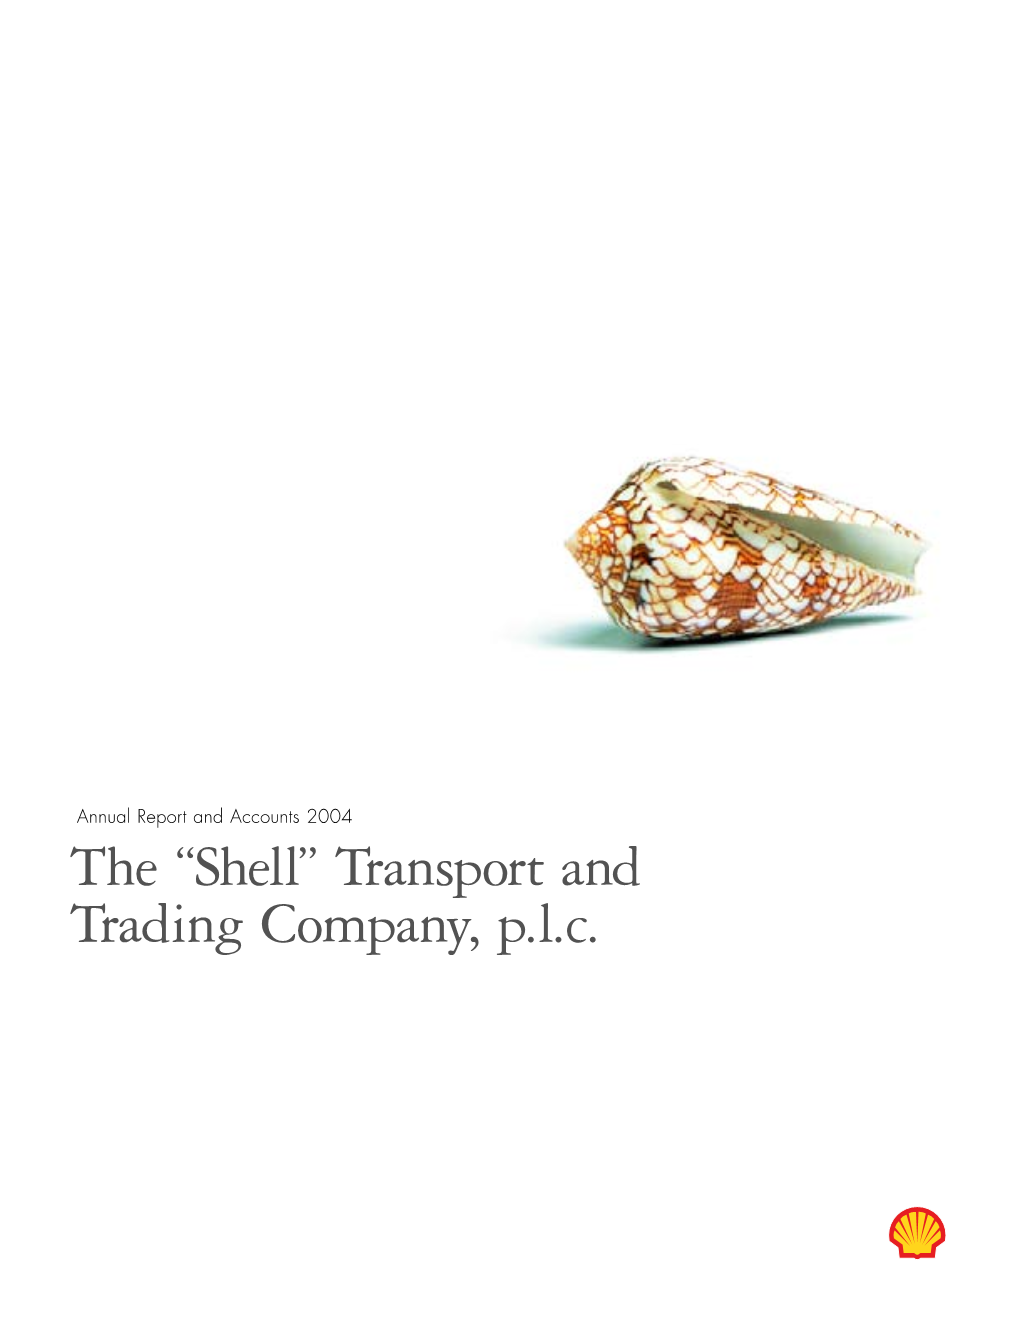 The “Shell” Transport and Trading Company, P.L.C. About This Report